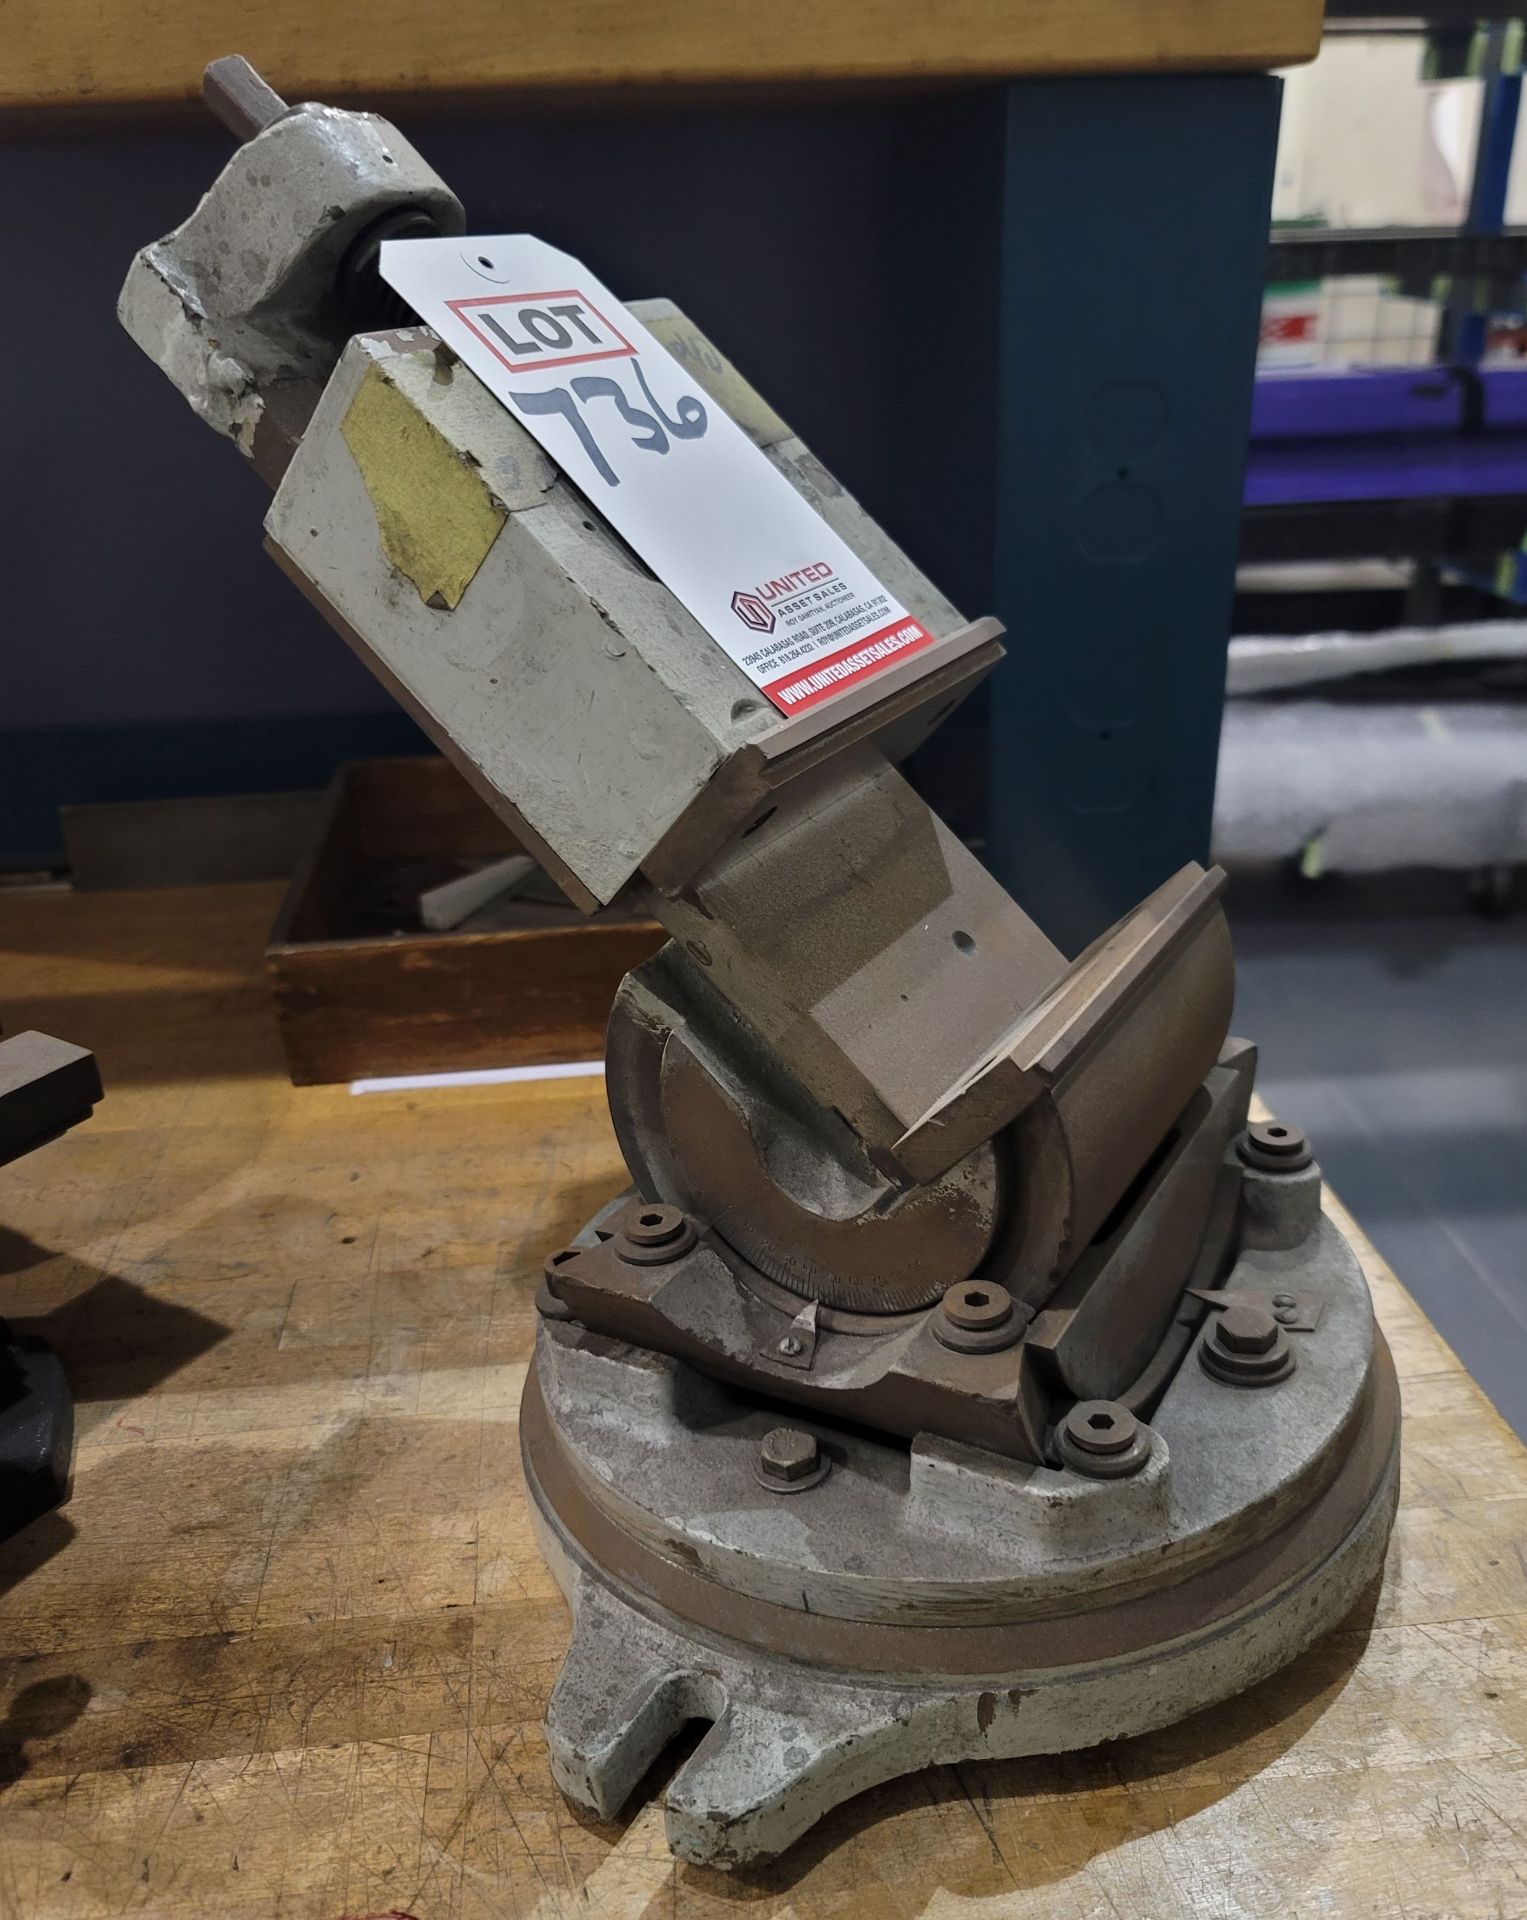 5-1/4" MACHINE VISE ON COMPOUND 3-AXIS SWIVEL BASE, NO DATA PLATE, (BUILDING 69 SOUTH)